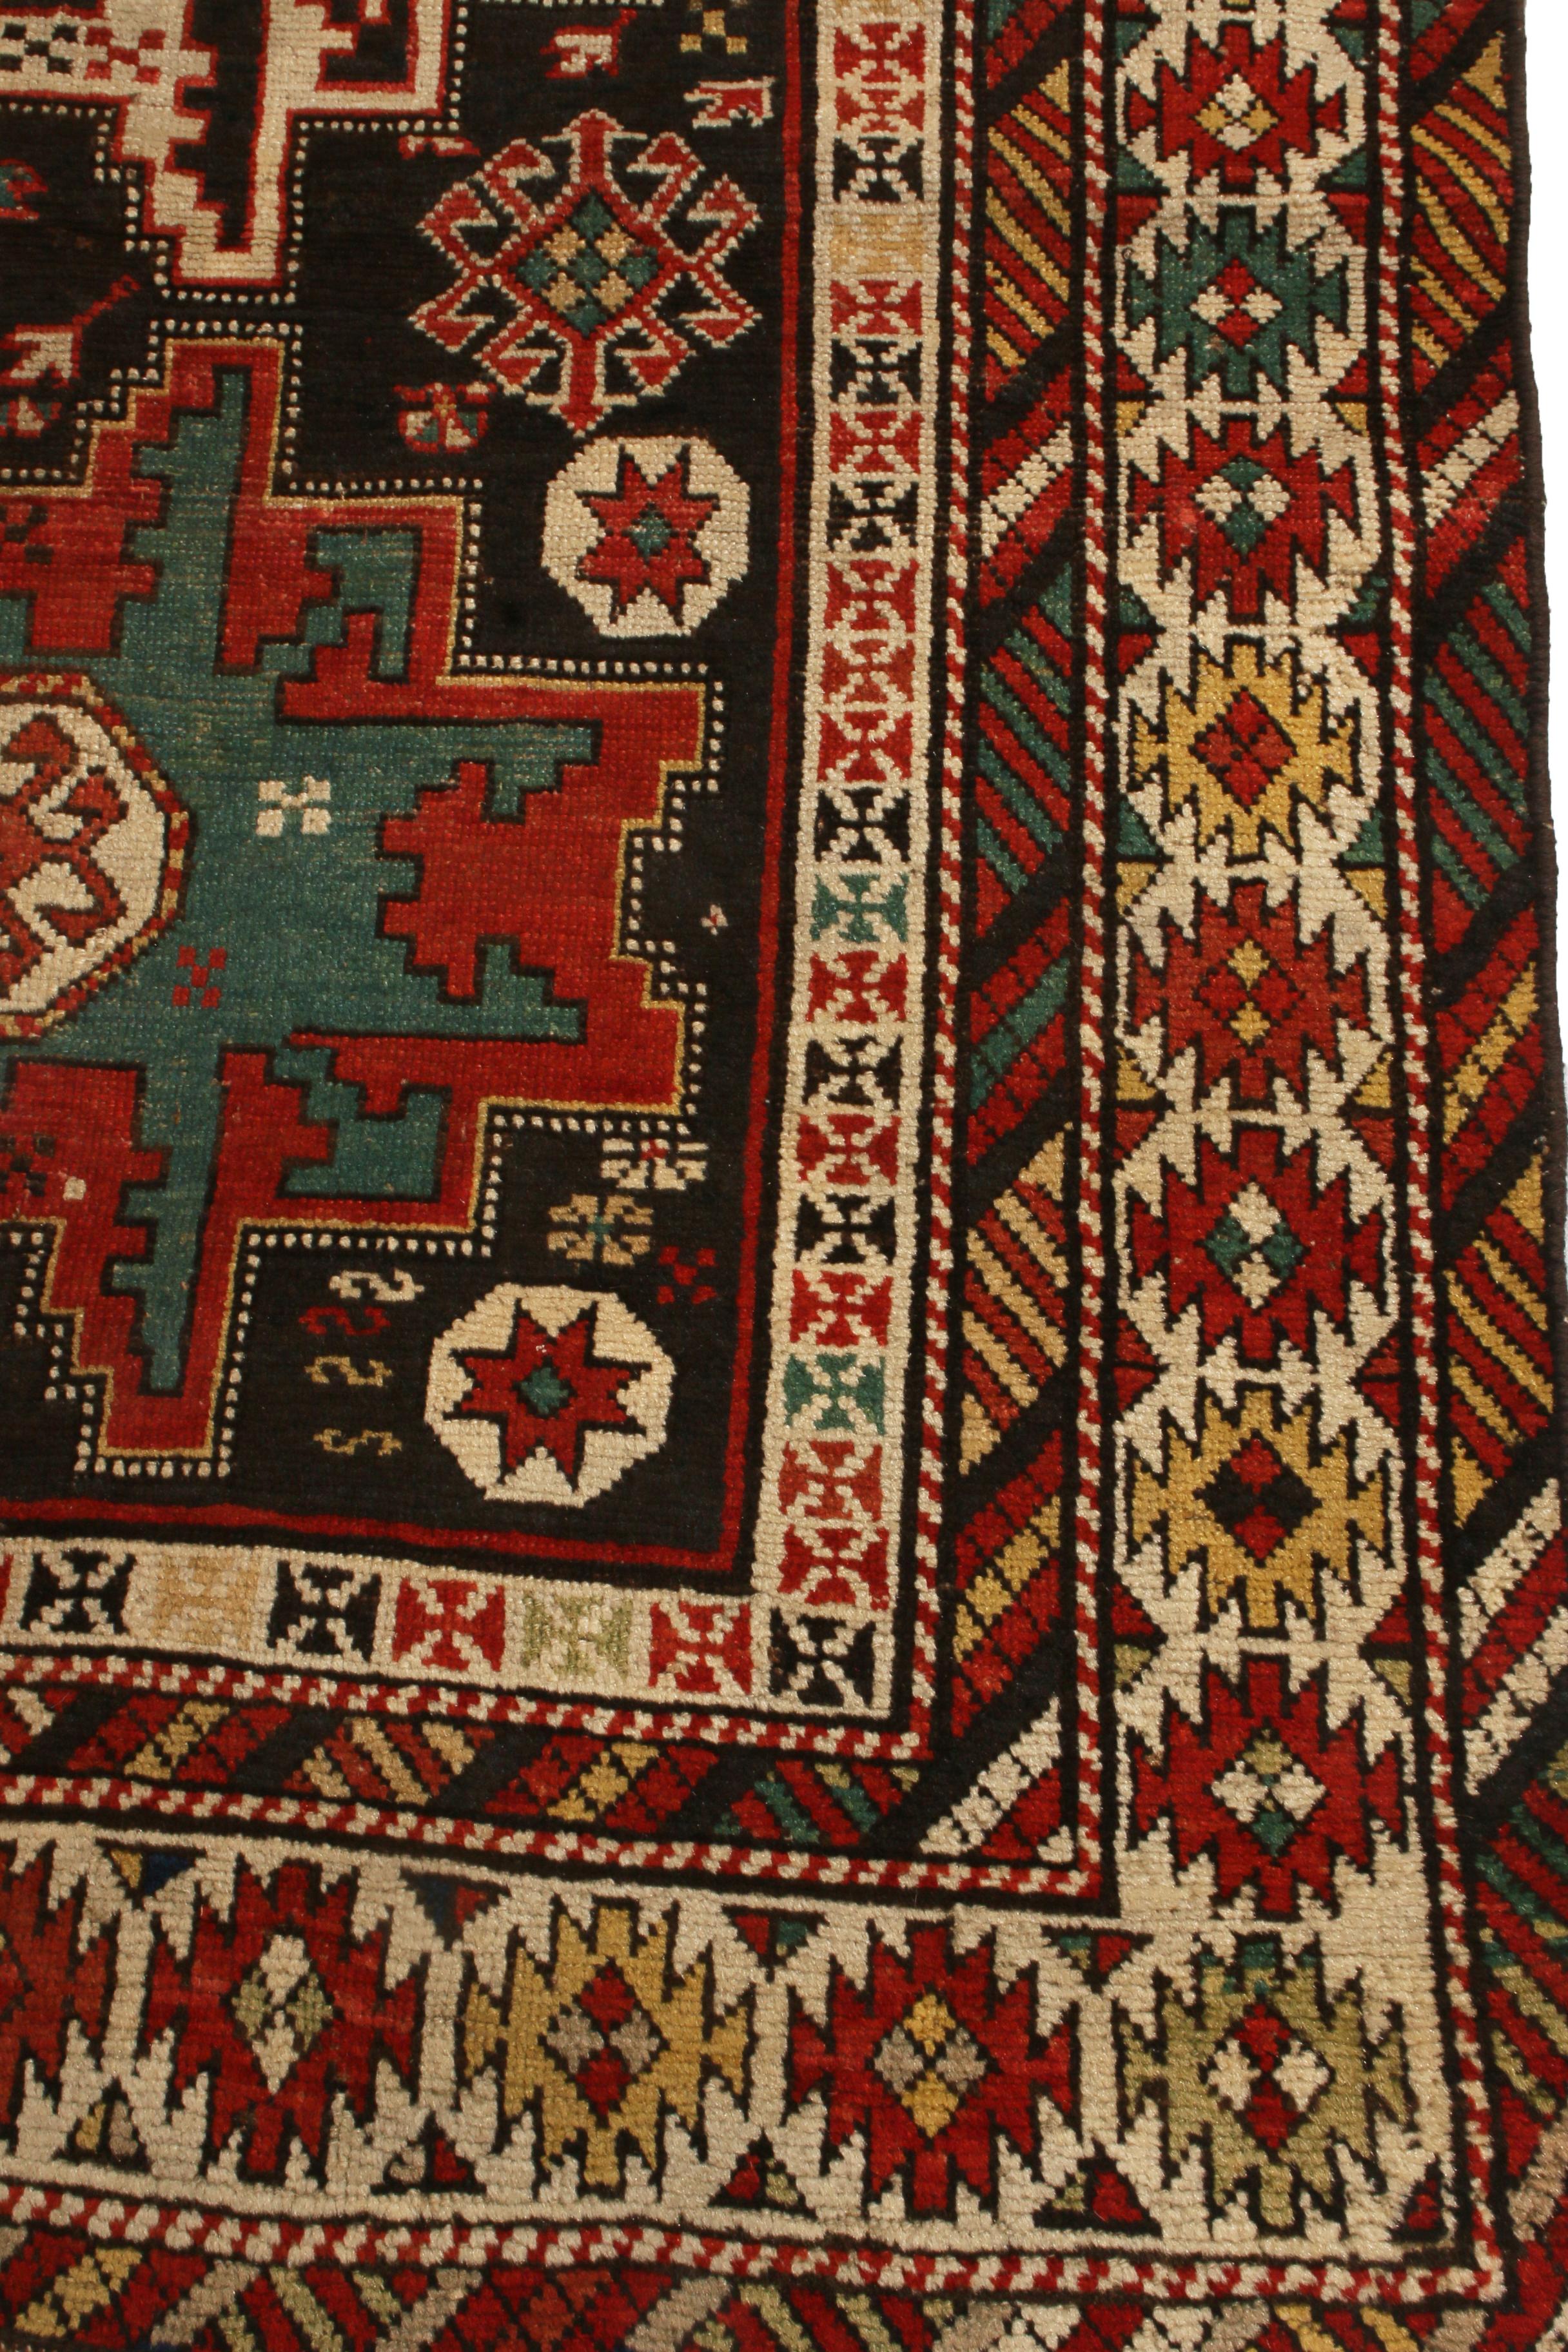 European Antique Lesgi Star Traditional Red and Beige Wool Rug